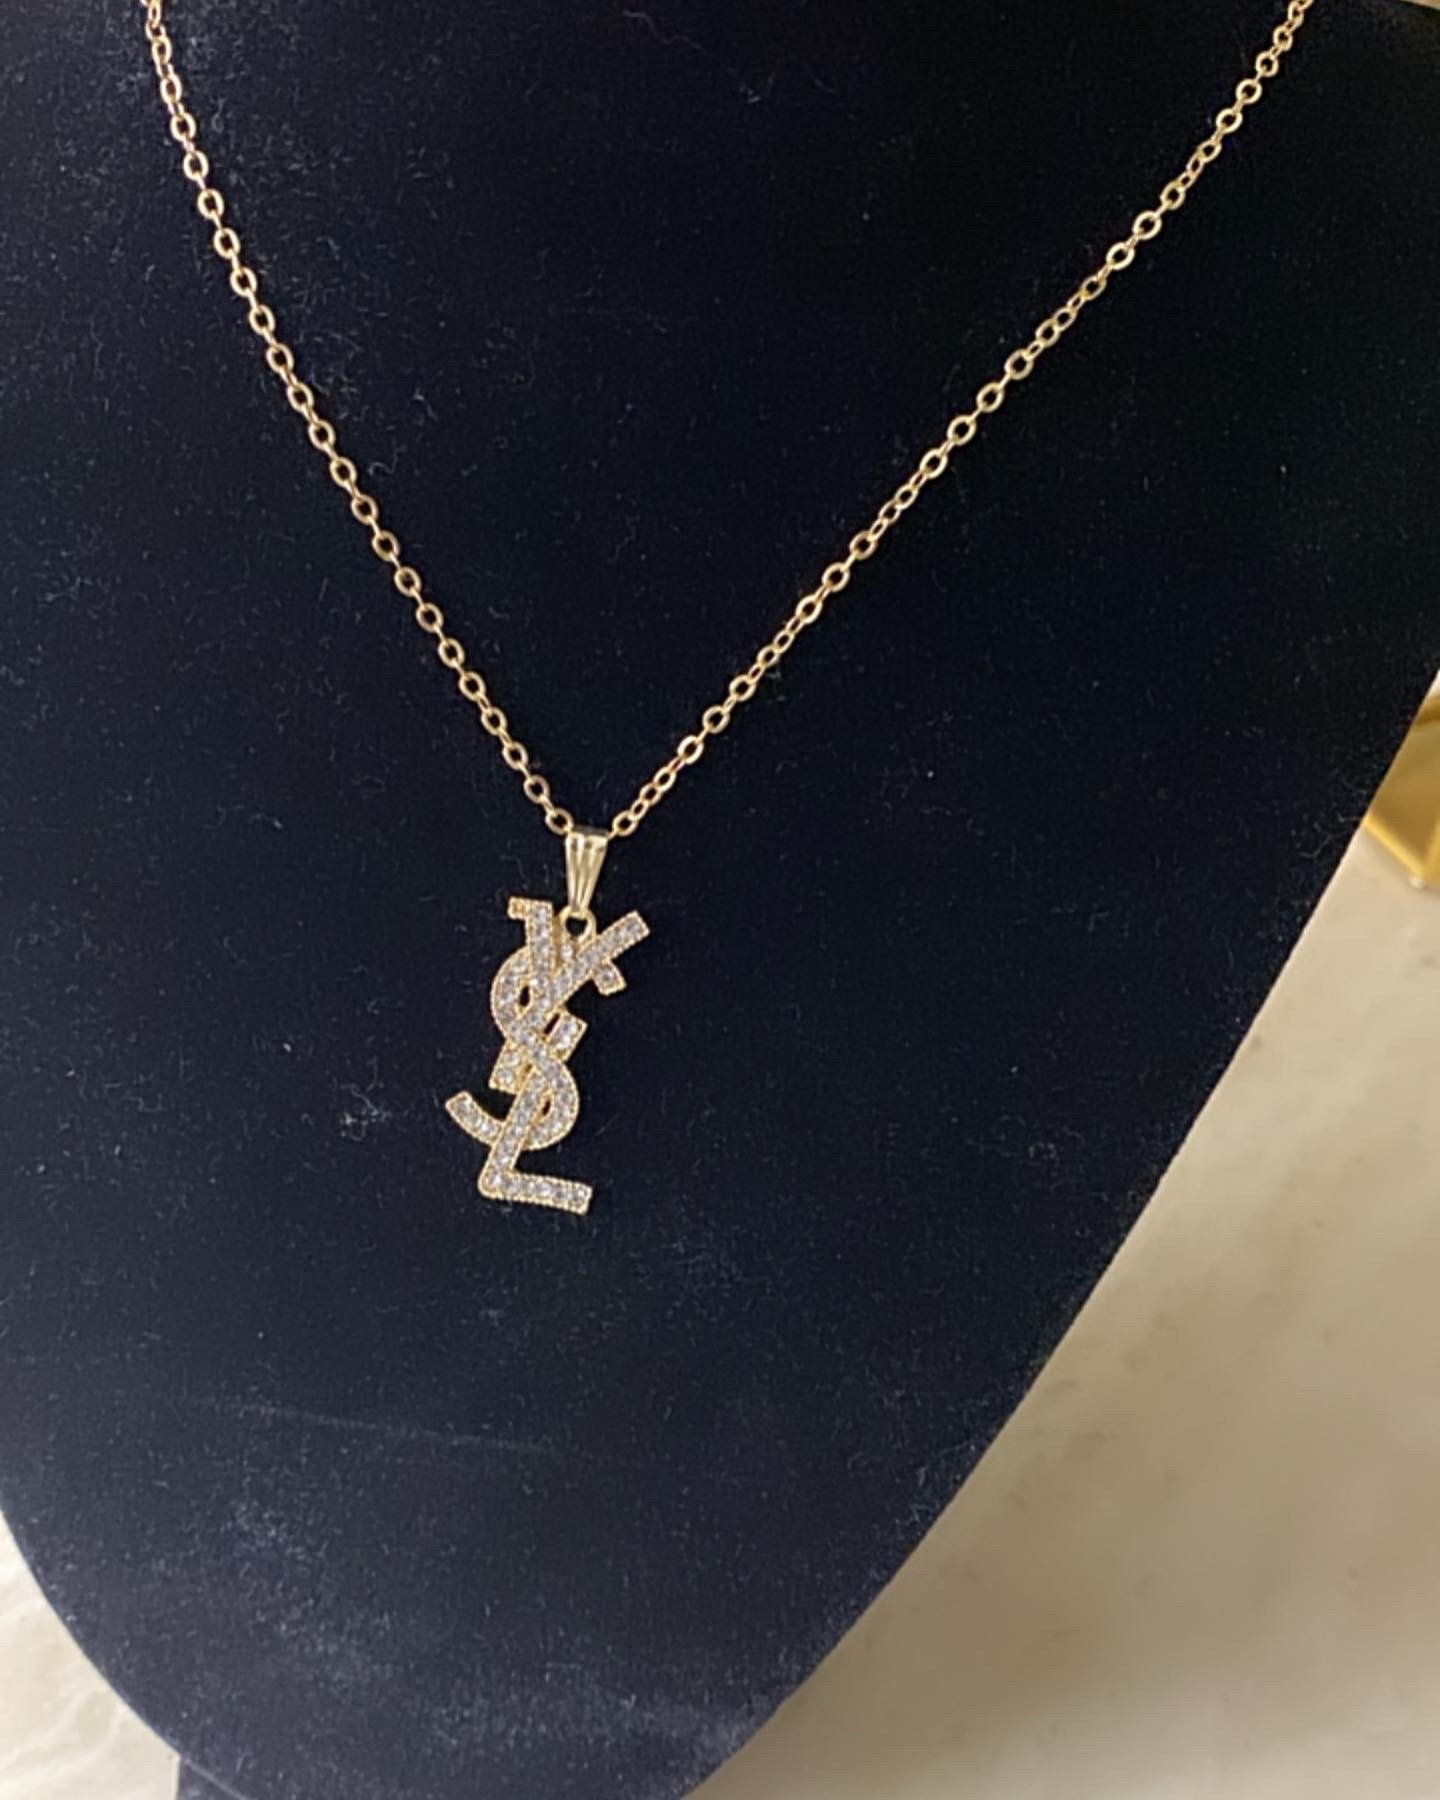 YSL Bling Necklace